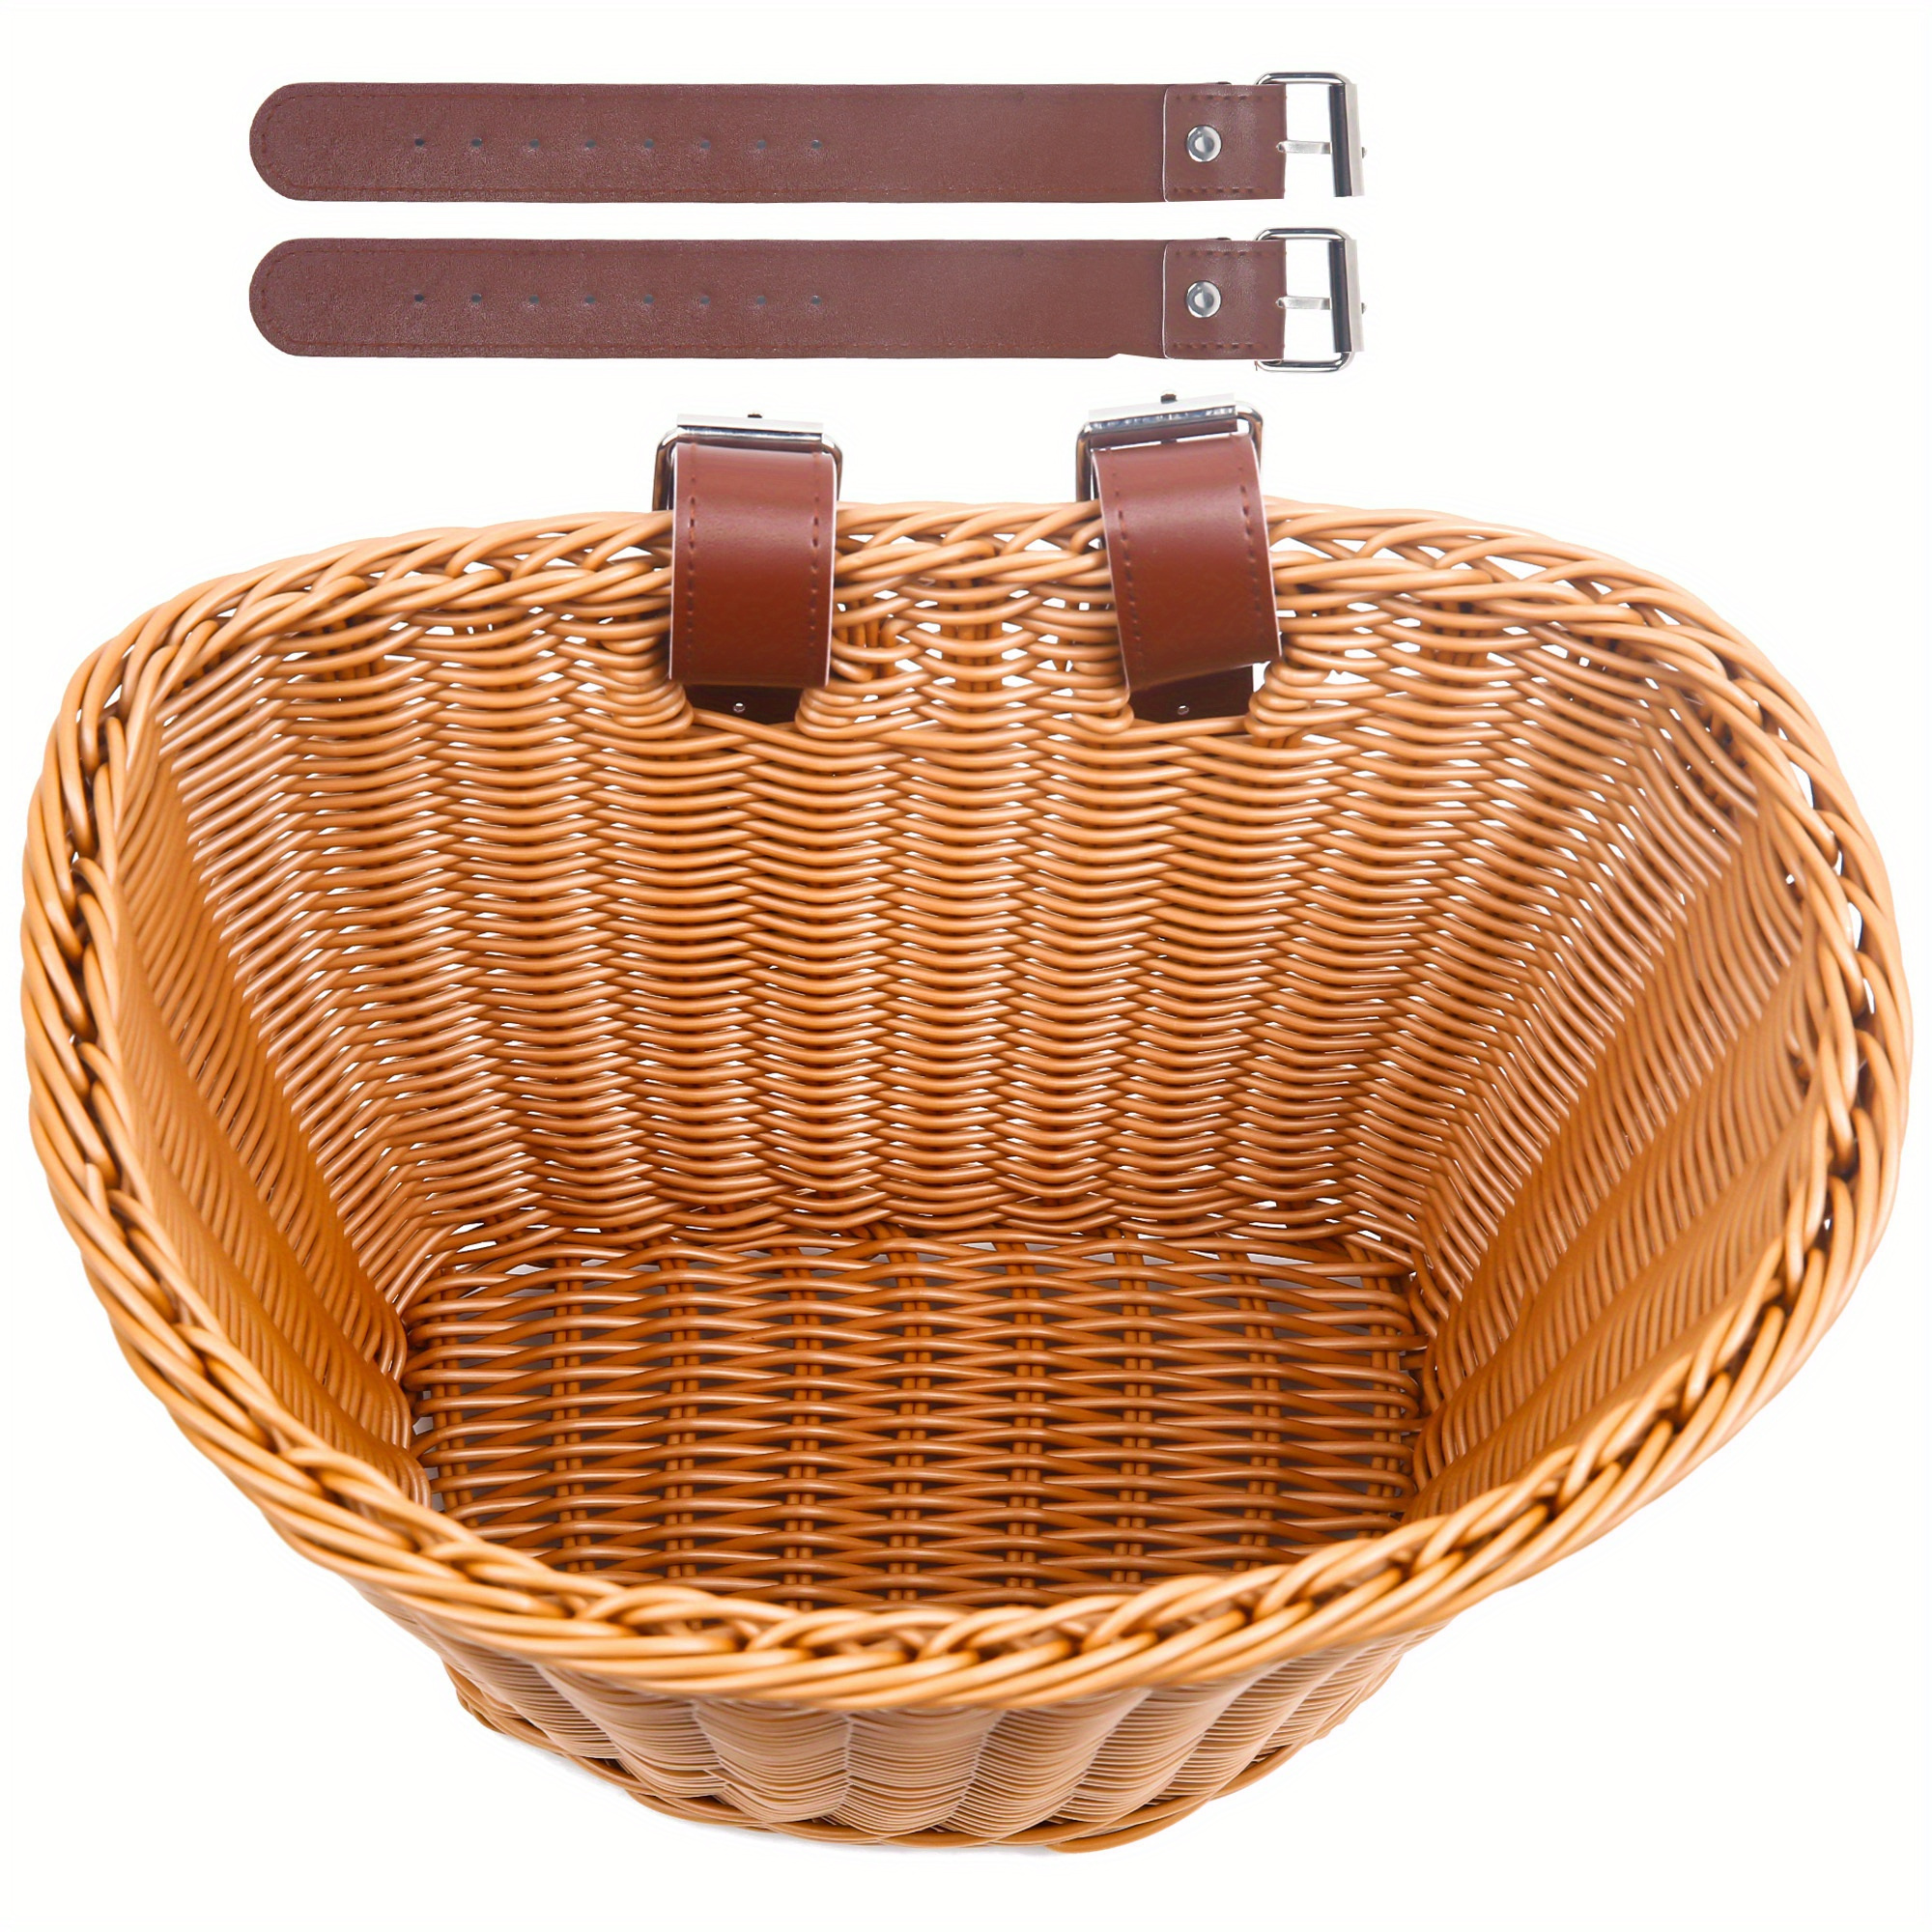 

Durable Woven Plastic Bike Basket - Front D-shaped Handlebar Storage With Adjustable Leather Straps For Outdoor Cycling